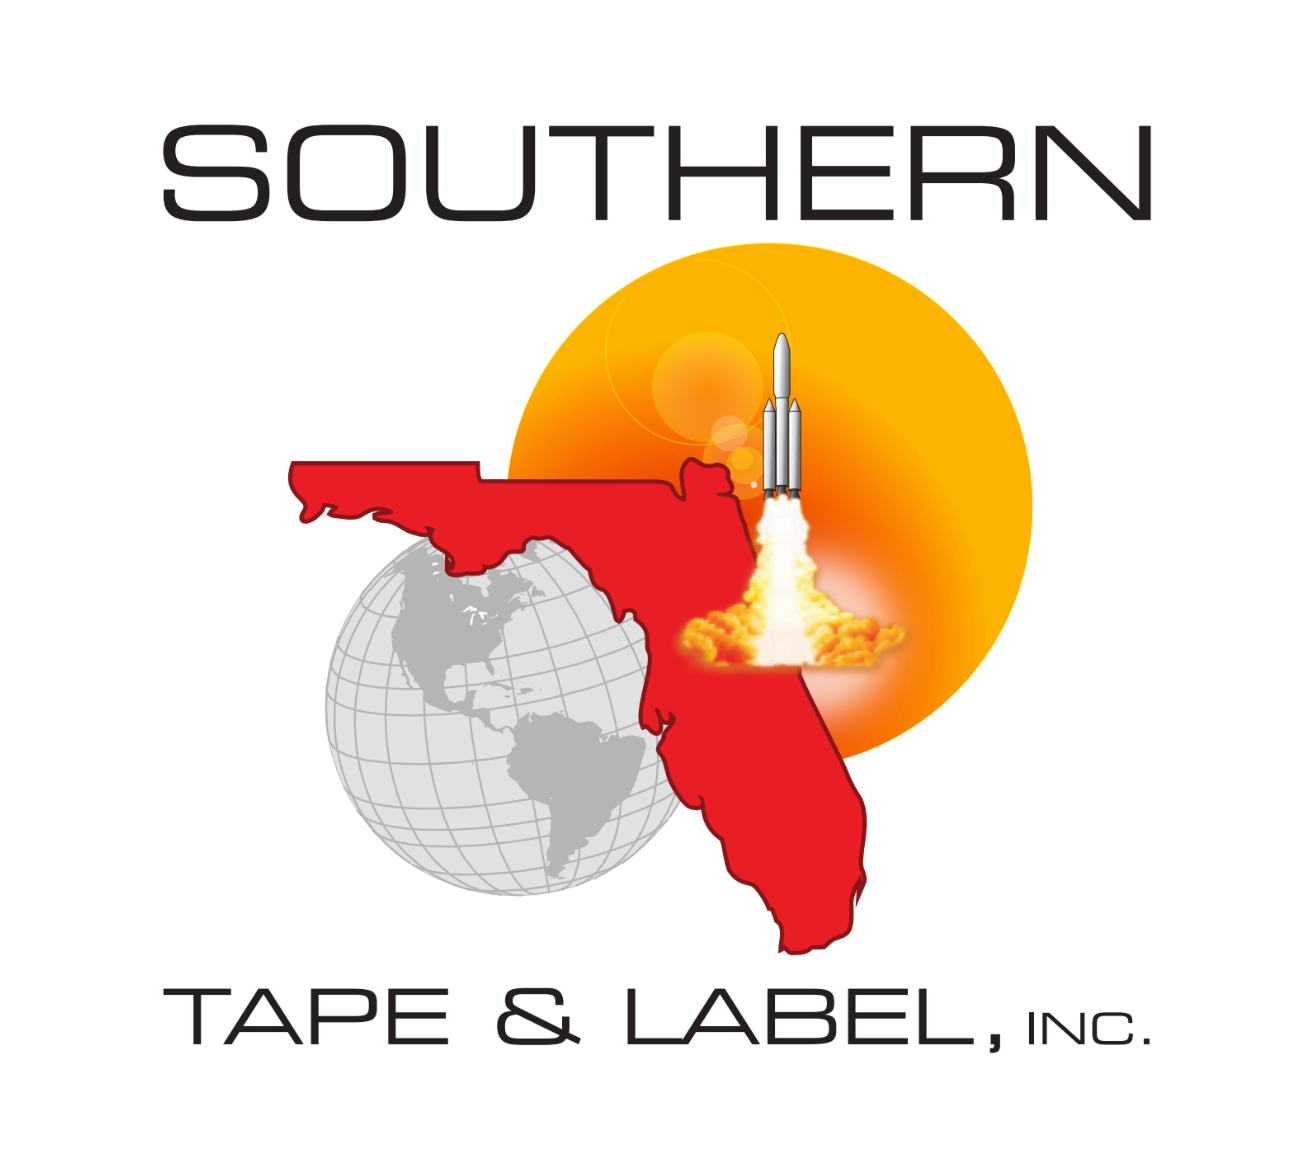 Southern Tape & Label